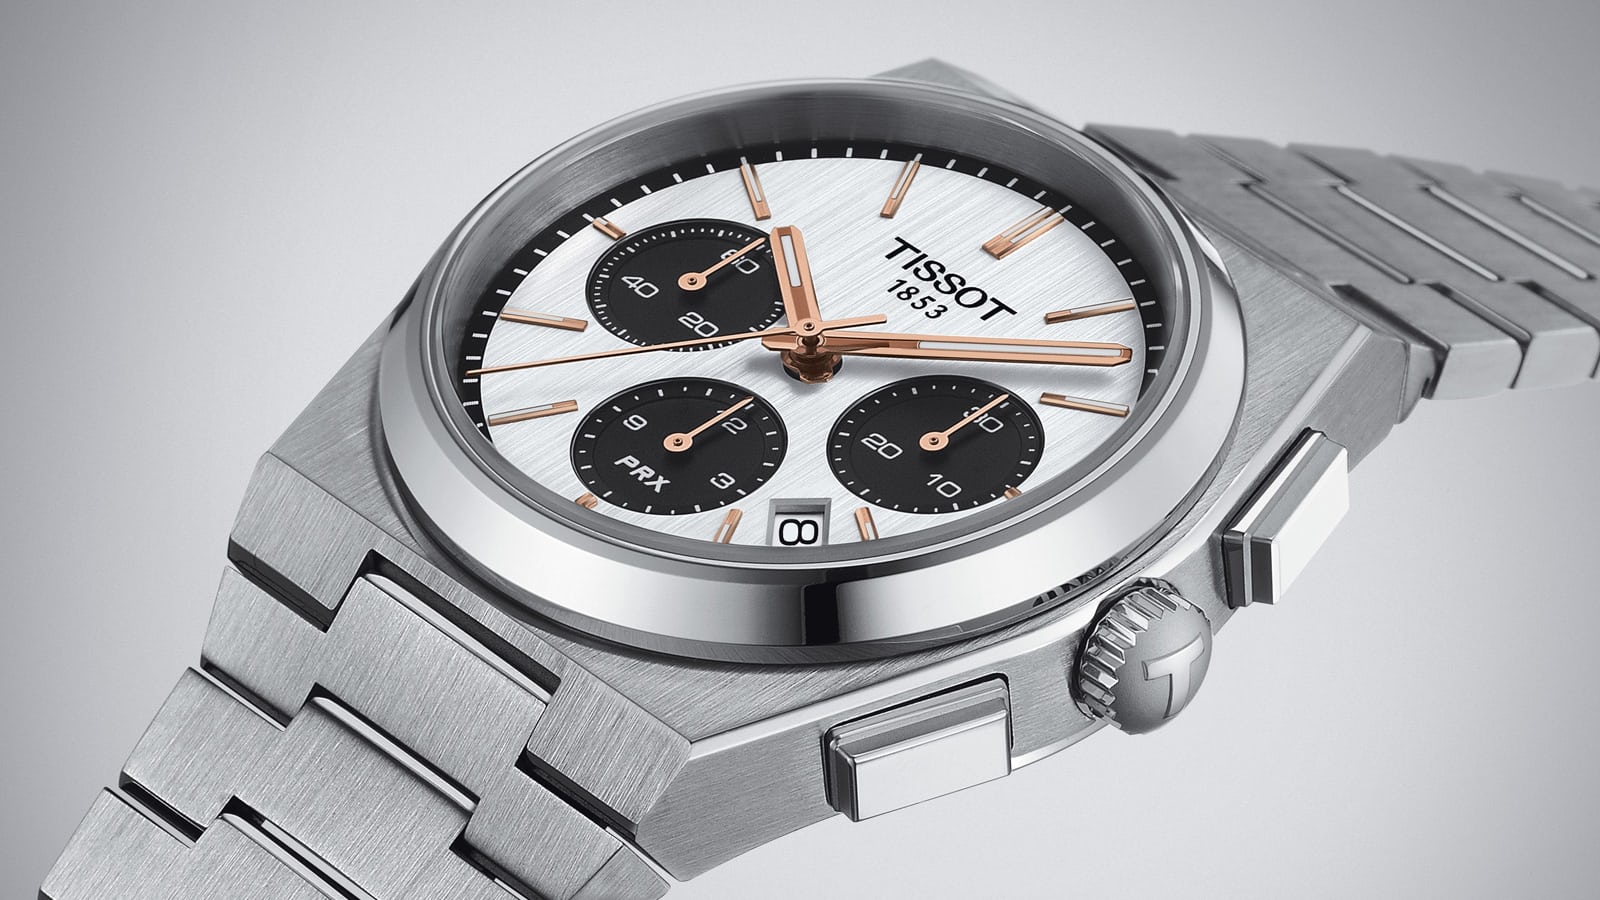 The Tissot PRX Chronograph Is This Year's Hype Watch ... So Far